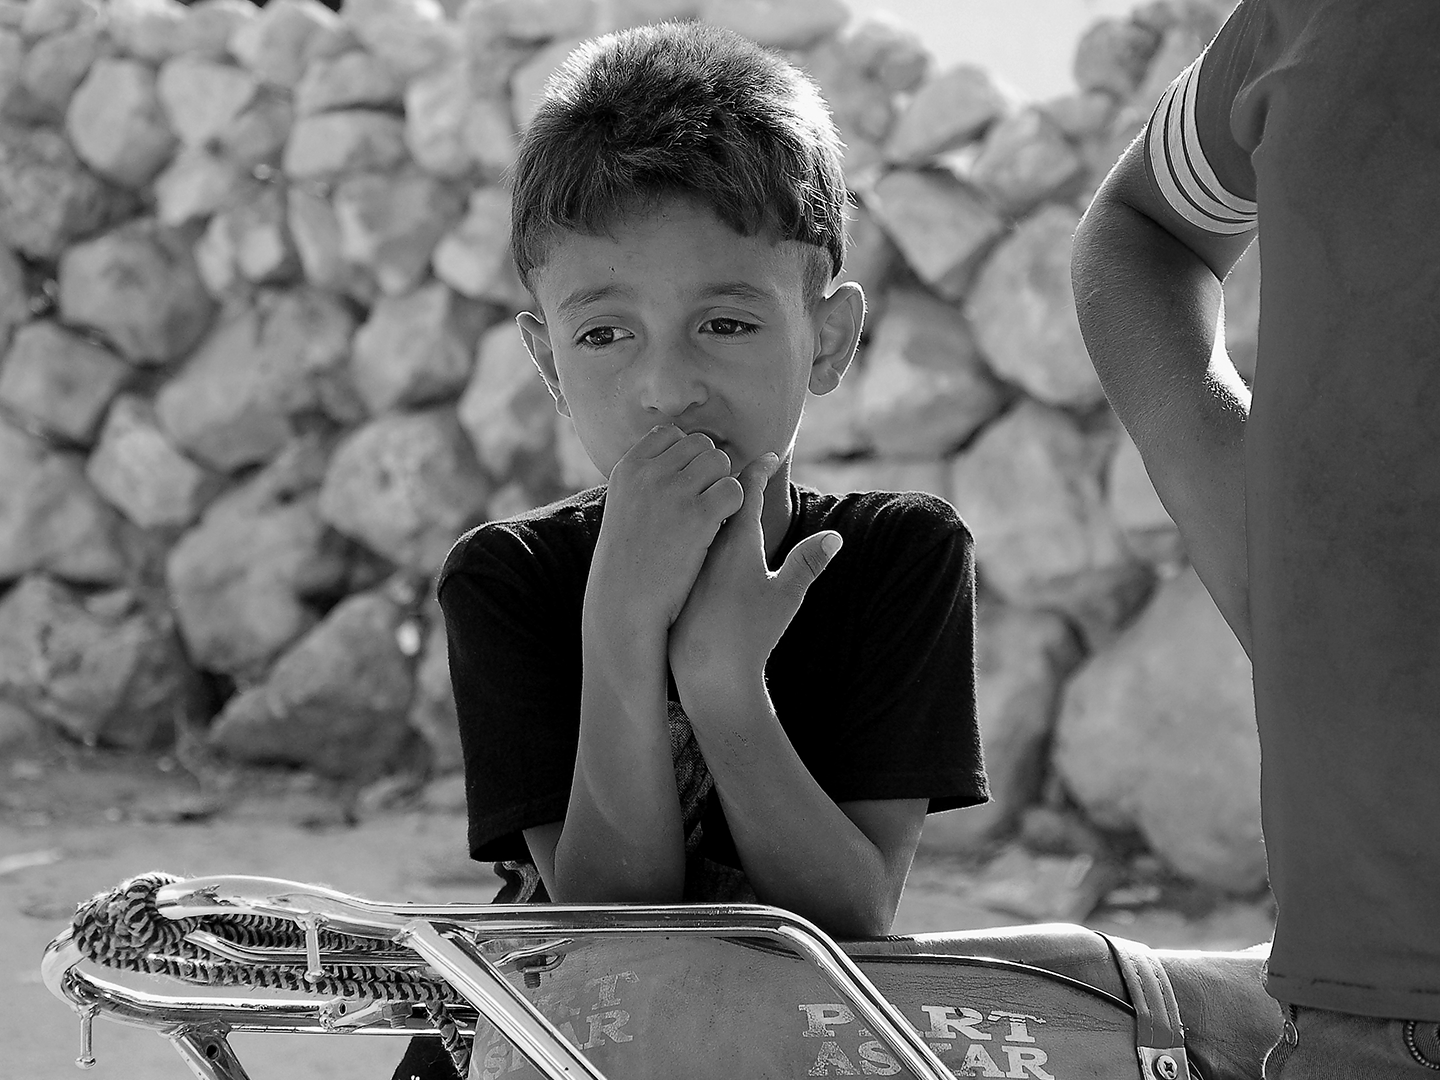 A kid affected by war in northern Syria